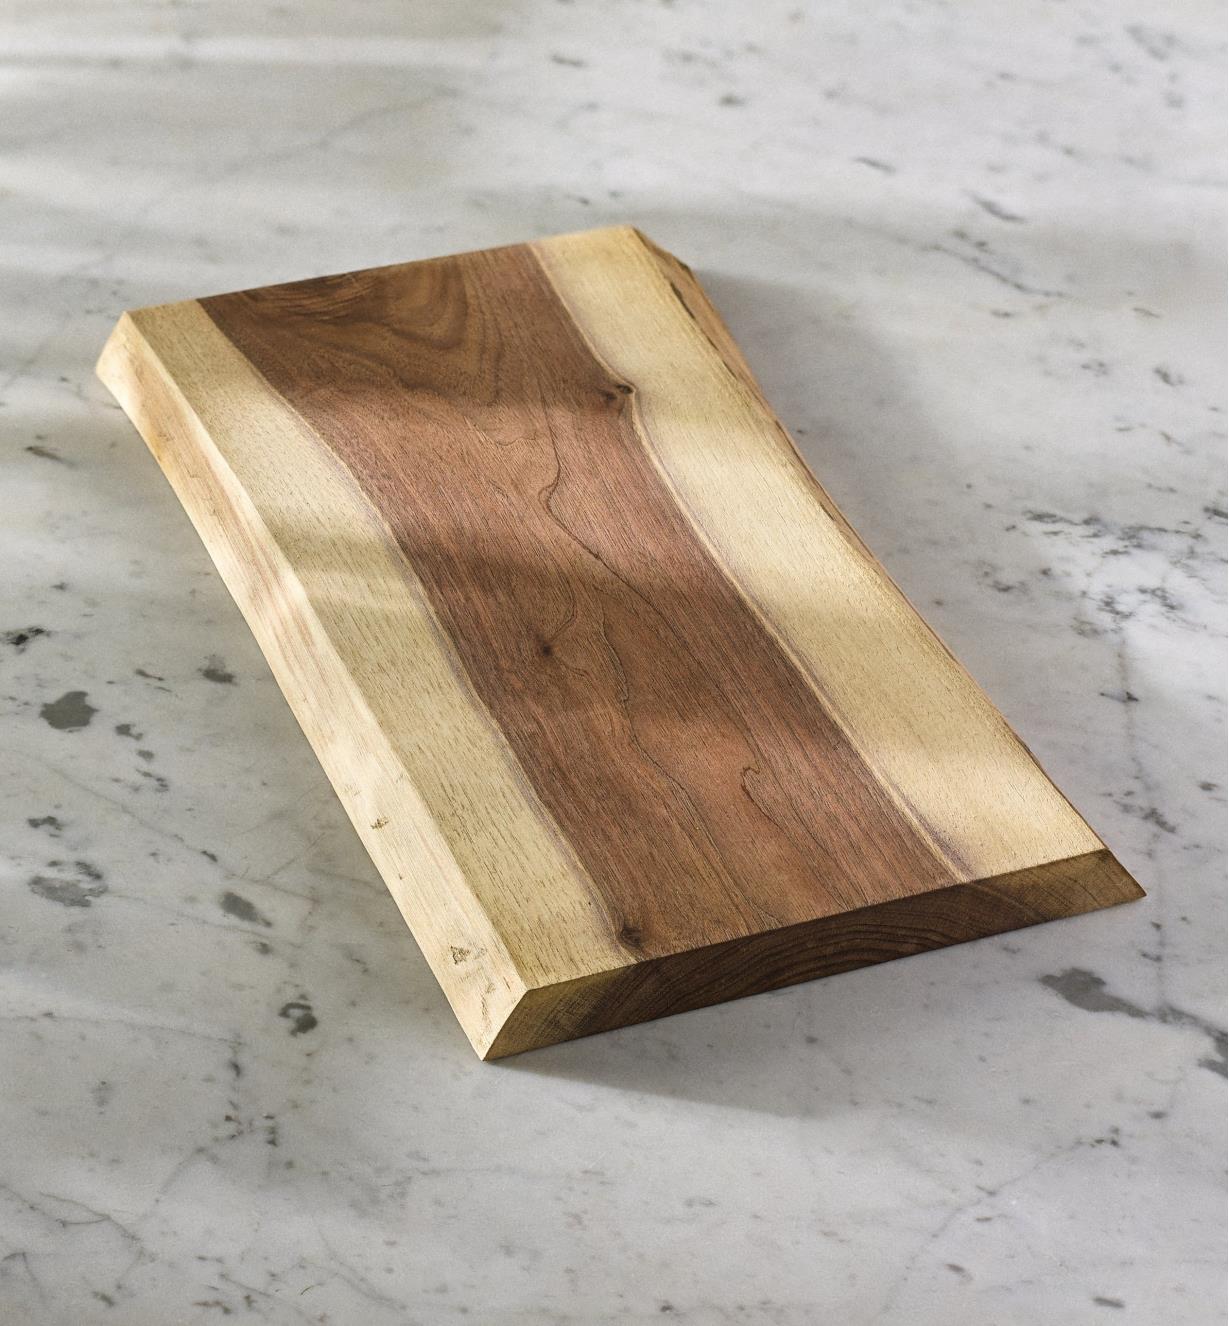 An example of the completed charcuterie board on a countertop